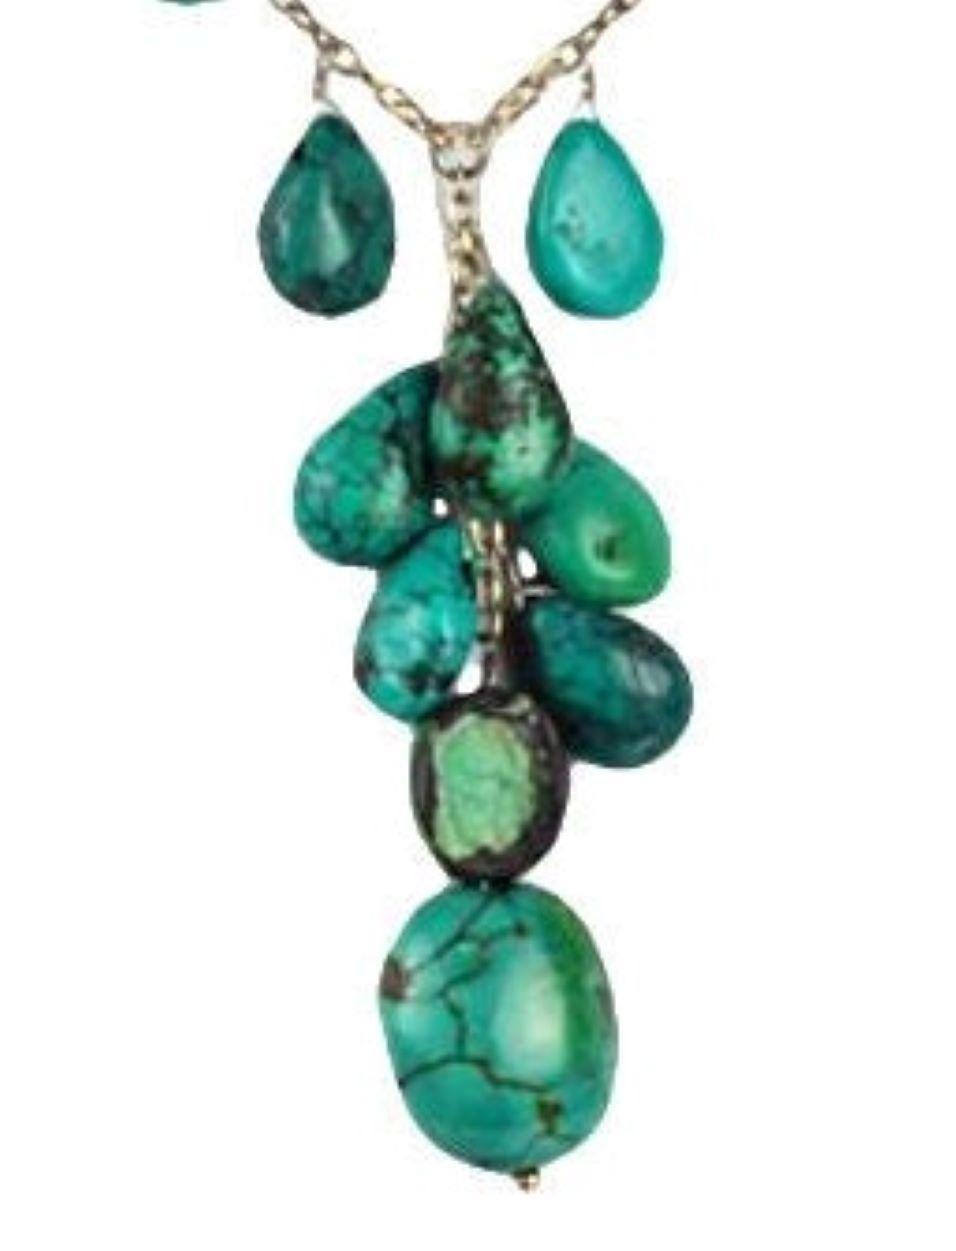 Simply Beautiful! Stylish Show Stopper Genuine Turquoise and Sterling Silver Y Designer Necklace. Suspending Multi-Shaped Turquoise Beads and Sterling Silver Chain. Approx. length: 24” including 4” drop. Necklace length around the neck measures